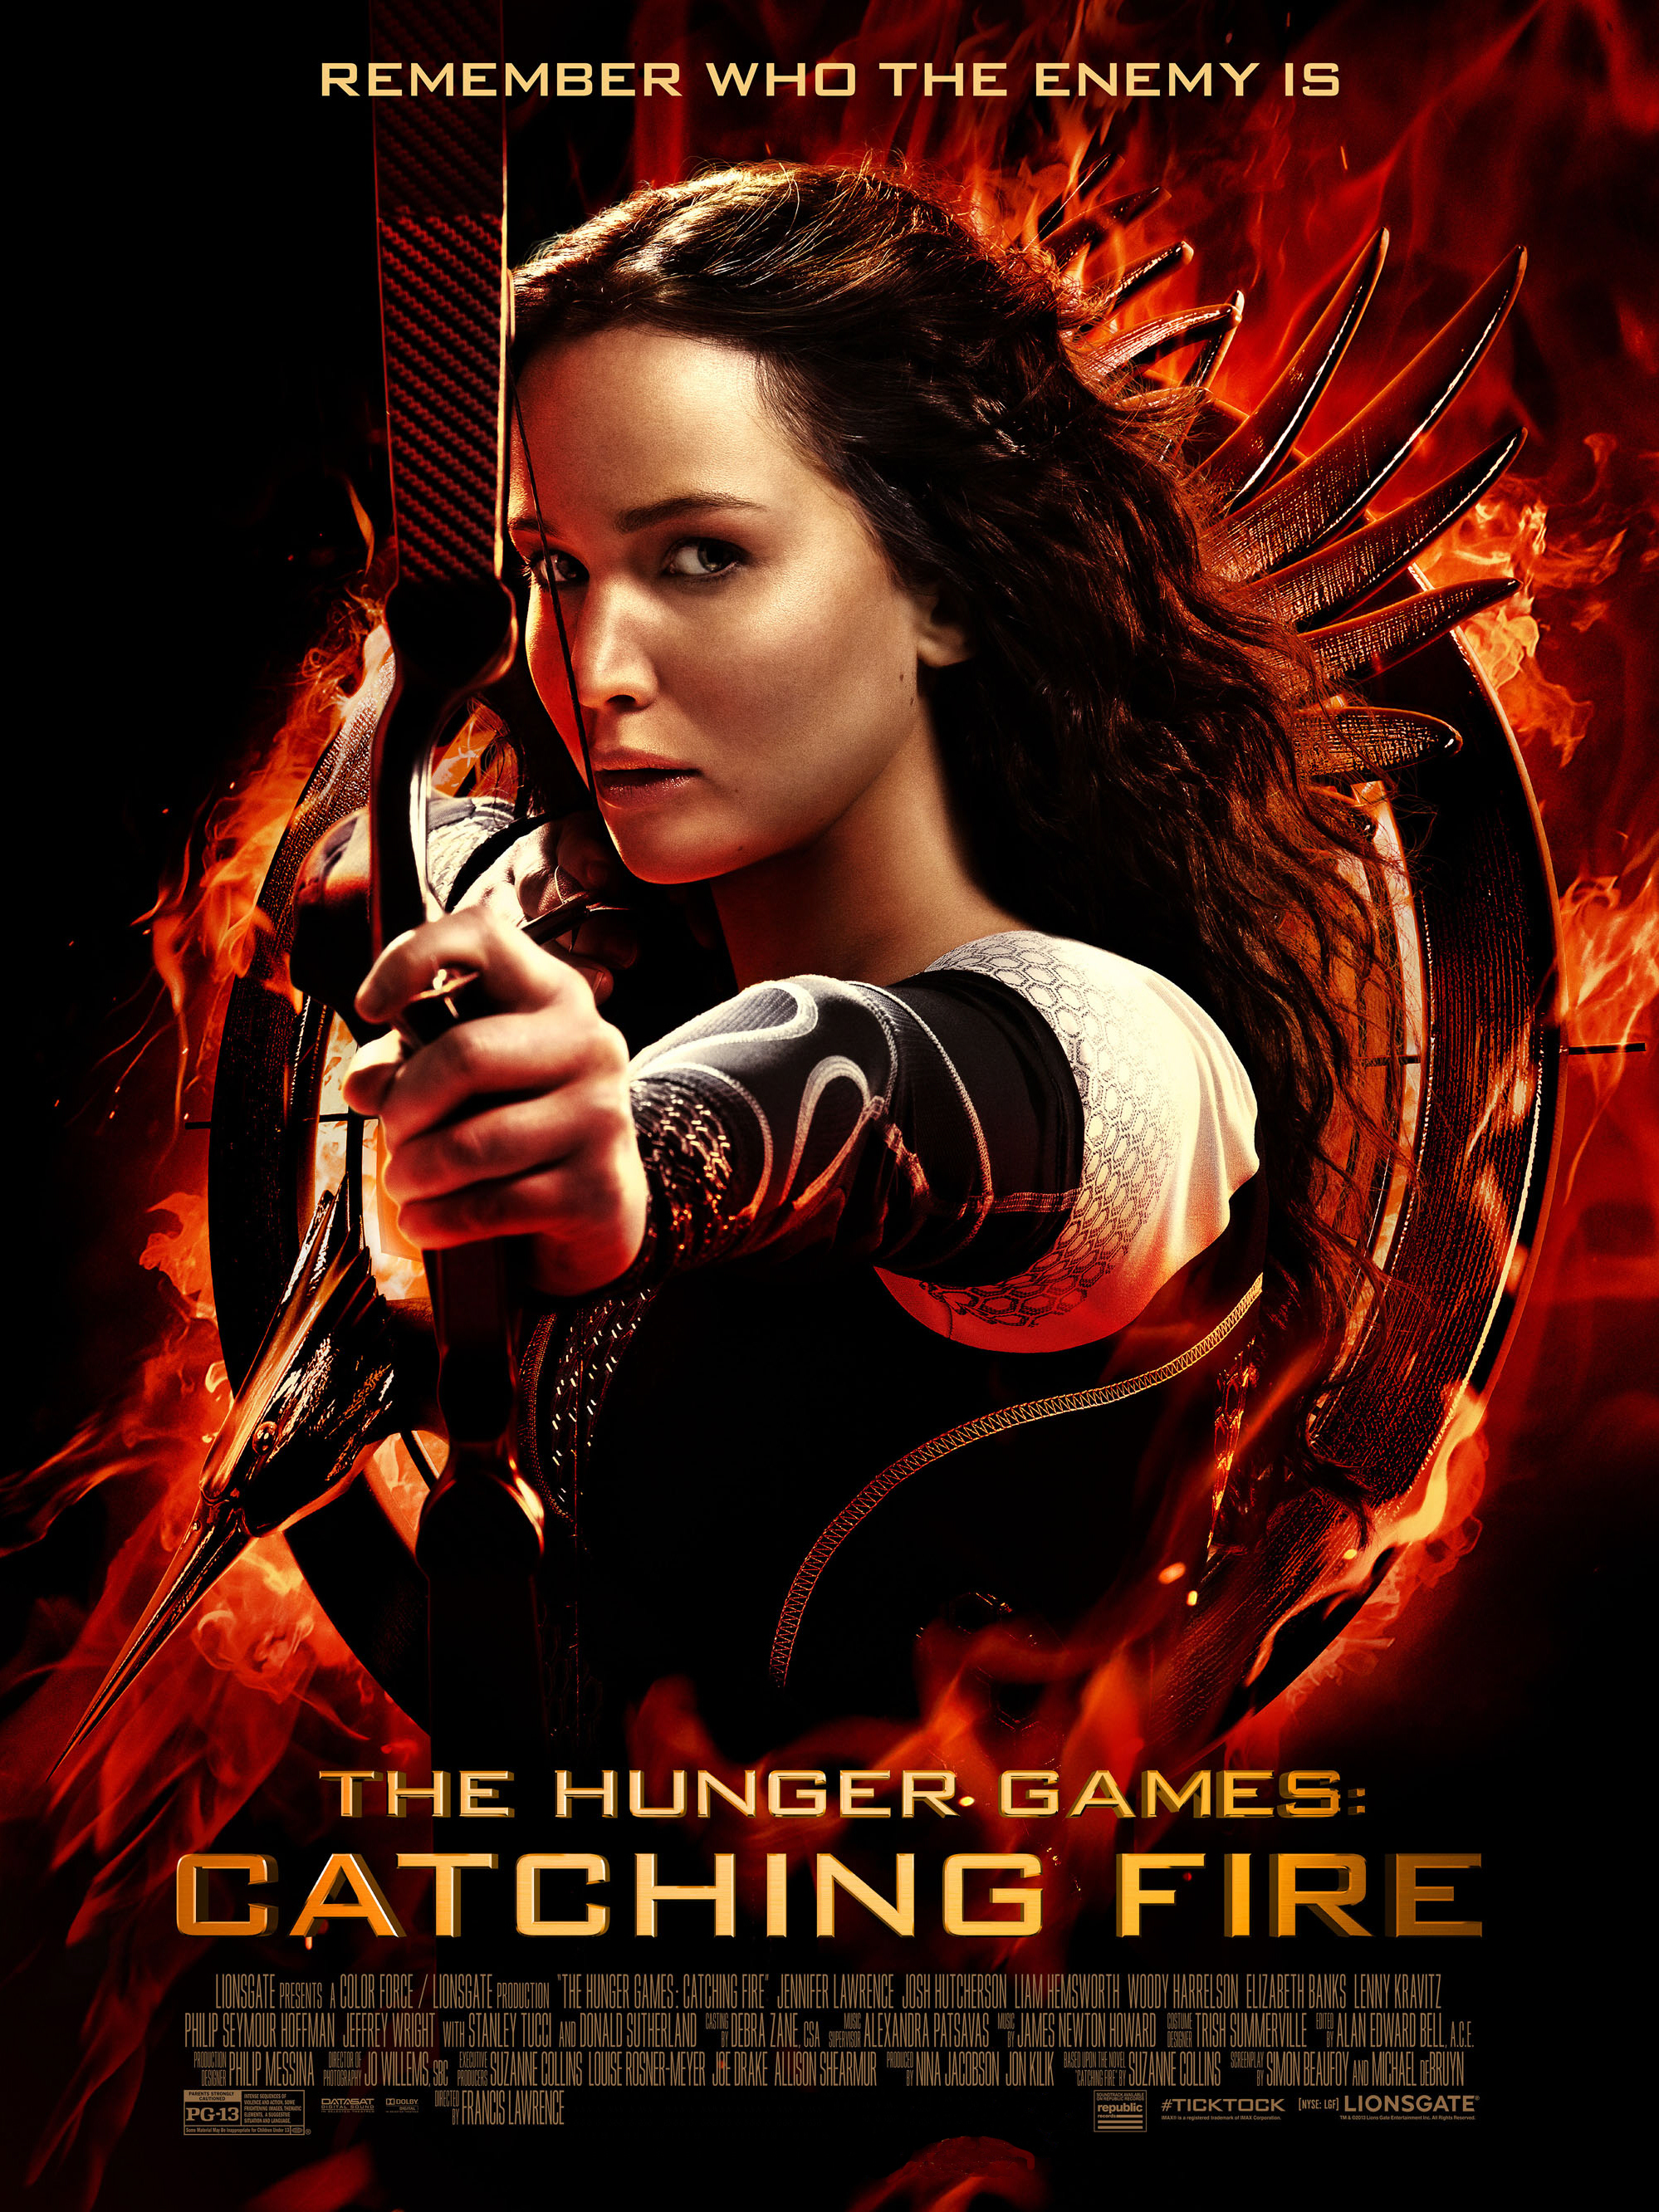 The Hunger Games: Catching Fire - Full Cast & Crew